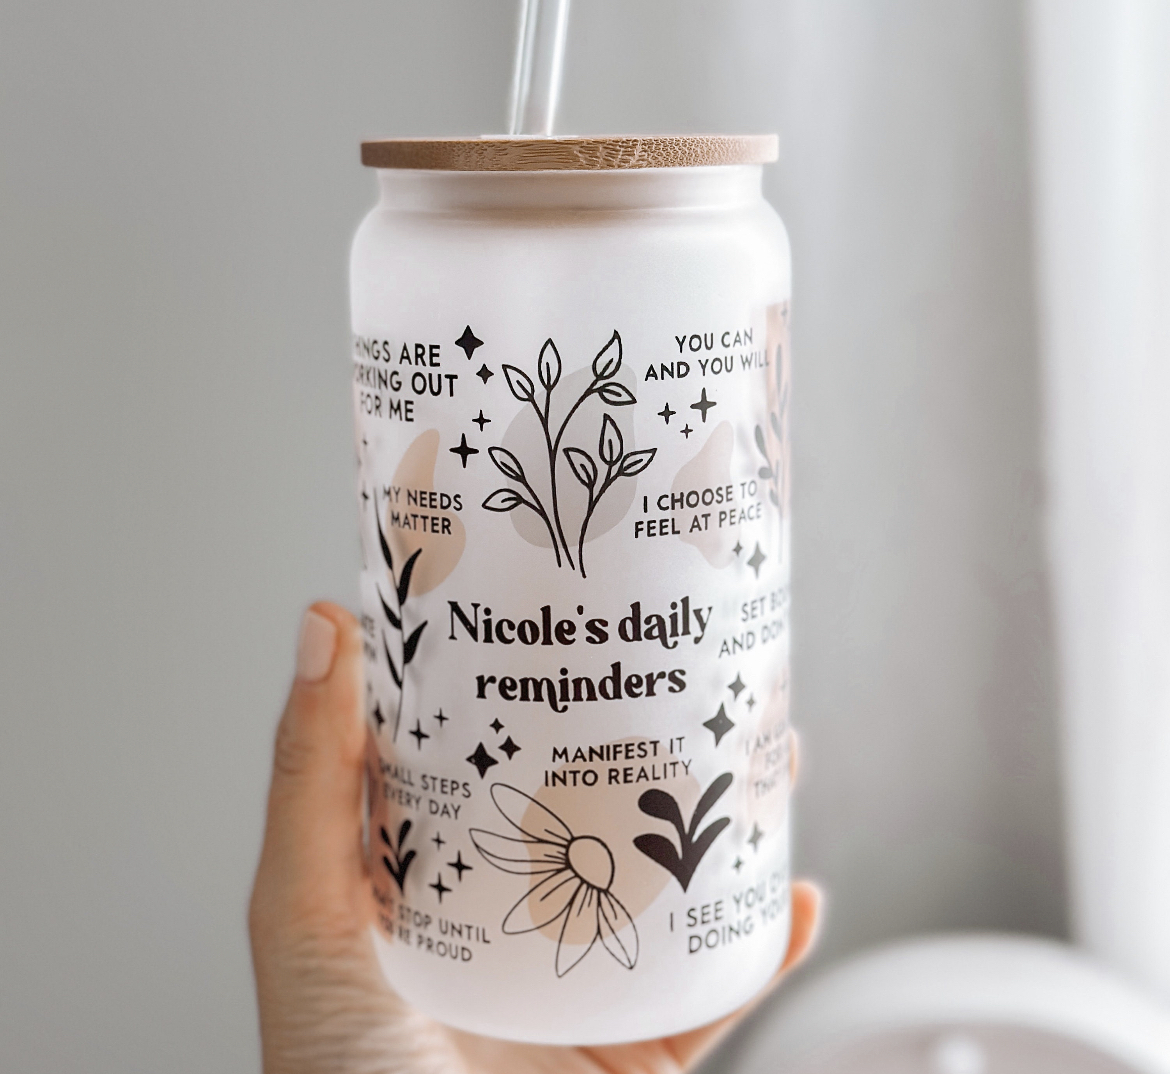 custom affirmation drinking tumbler on etsy. Best friend gifts. Gift ideas for best friend. BFF gift ideas. Bestie gift ideas. Gift Ideas for a special friend. Gift ideas for sister. Gift ideas for female best friends. Presents for best friend. Unique best friend gifts. Meaningful gift ideas. Thoughtful presents